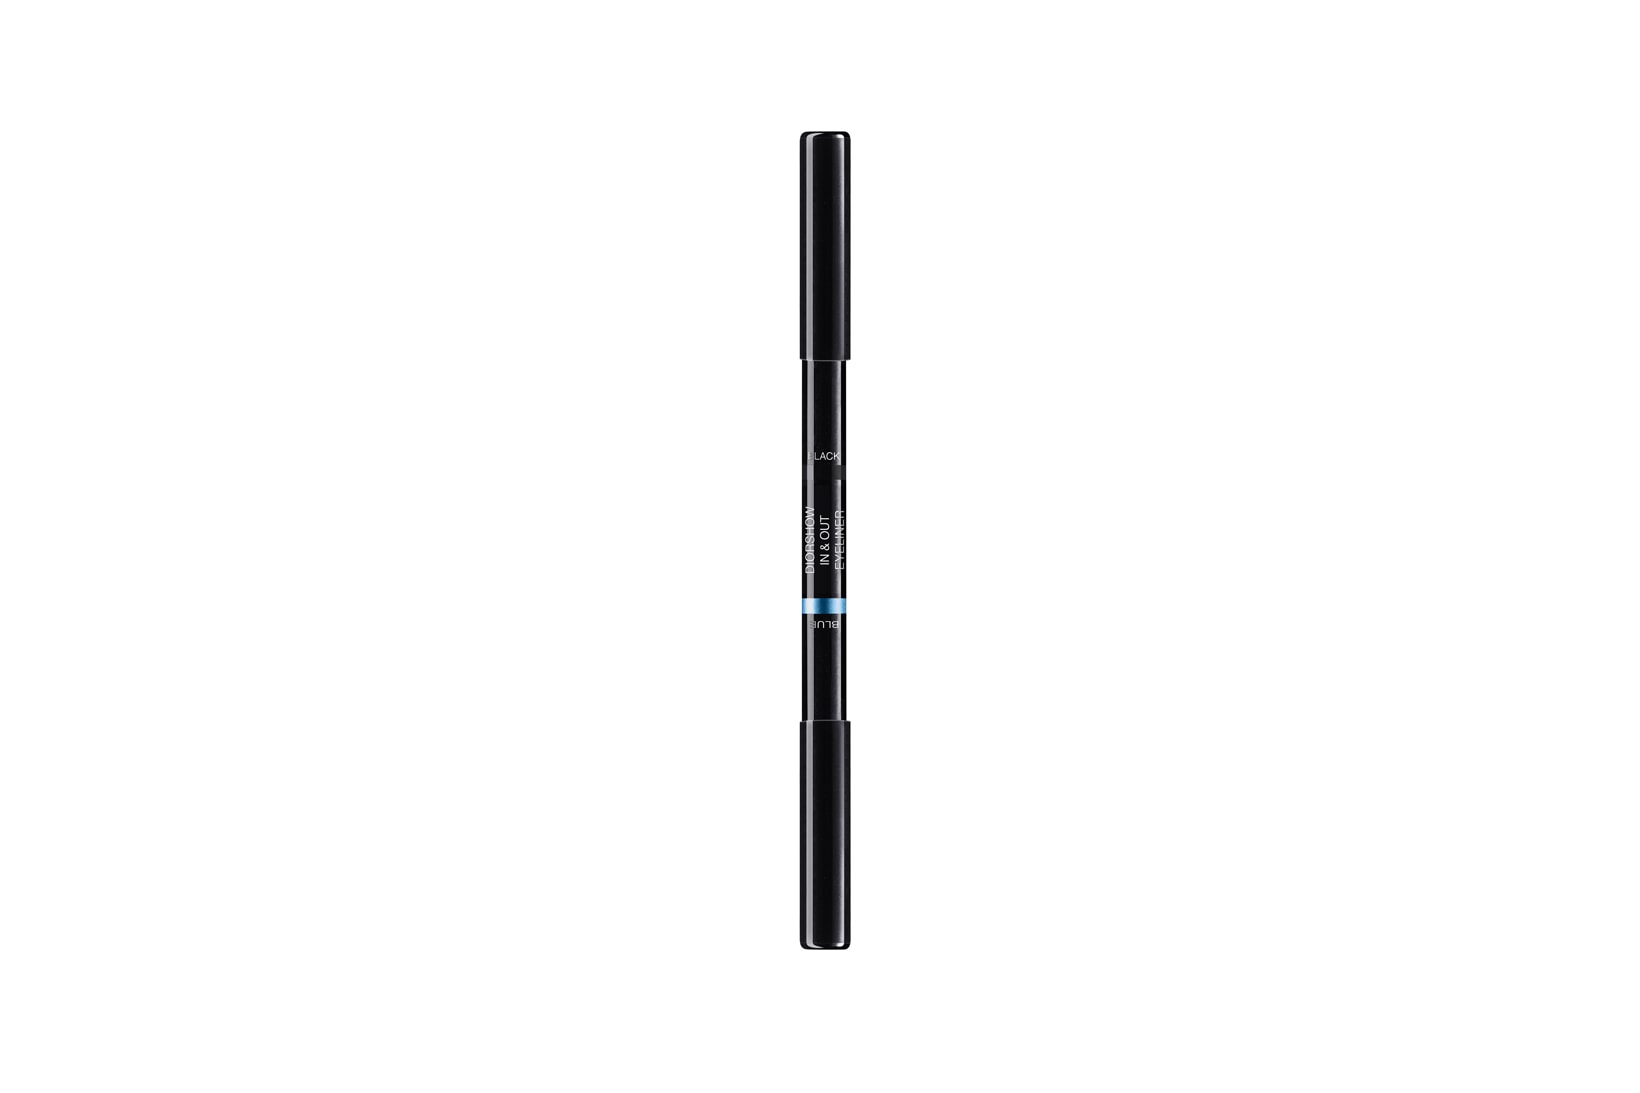 Dior Beauty Wild Earth Summer 2019 Collection Tattoo In & Out Liner Blue Black